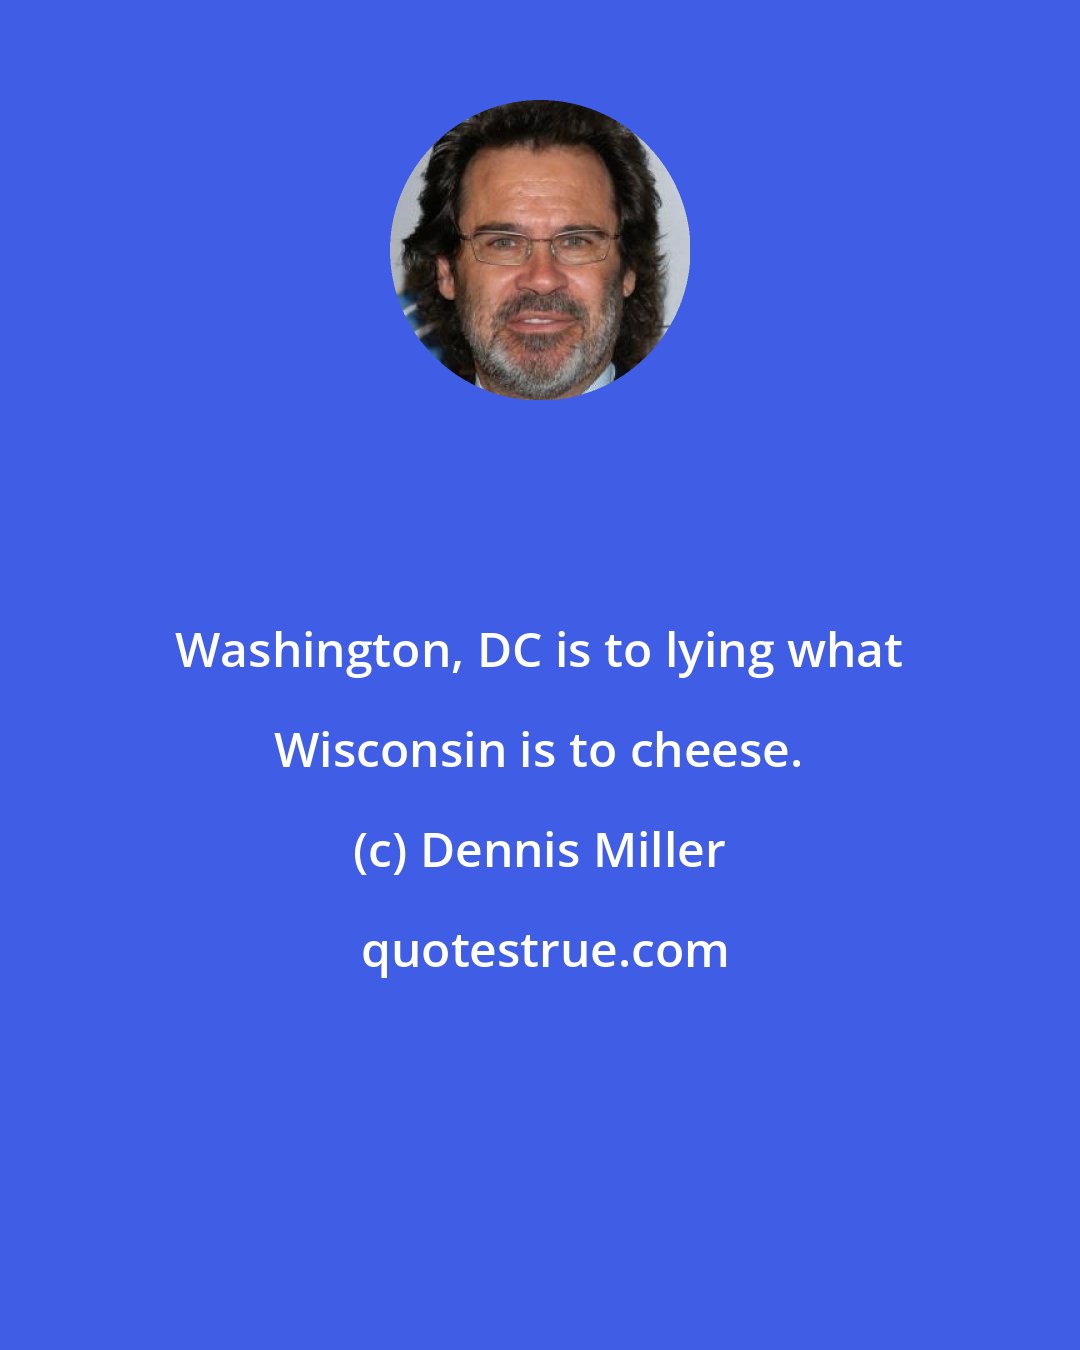 Dennis Miller: Washington, DC is to lying what Wisconsin is to cheese.